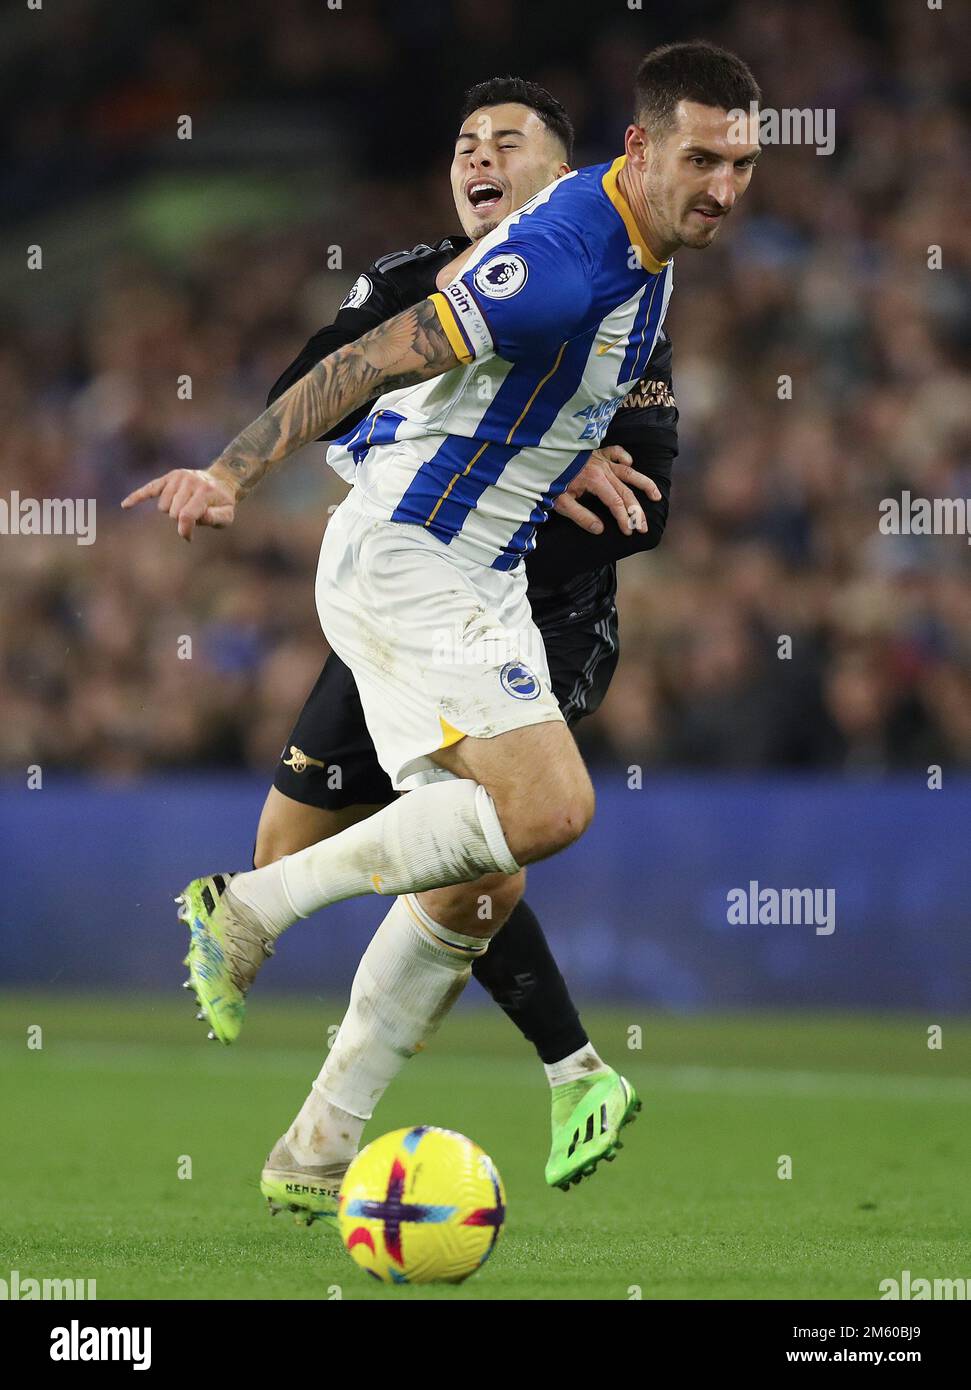 Brighton and Hove, UK. 31st Dec, 2022. Lewis Dunk of Brighton and Hove Albion and Gabriel Martinelli of Arsenal challenge for the ball during the Premier League match at the AMEX Stadium, Brighton and Hove. Picture credit should read: Paul Terry/Sportimage Credit: Sportimage/Alamy Live News Stock Photo